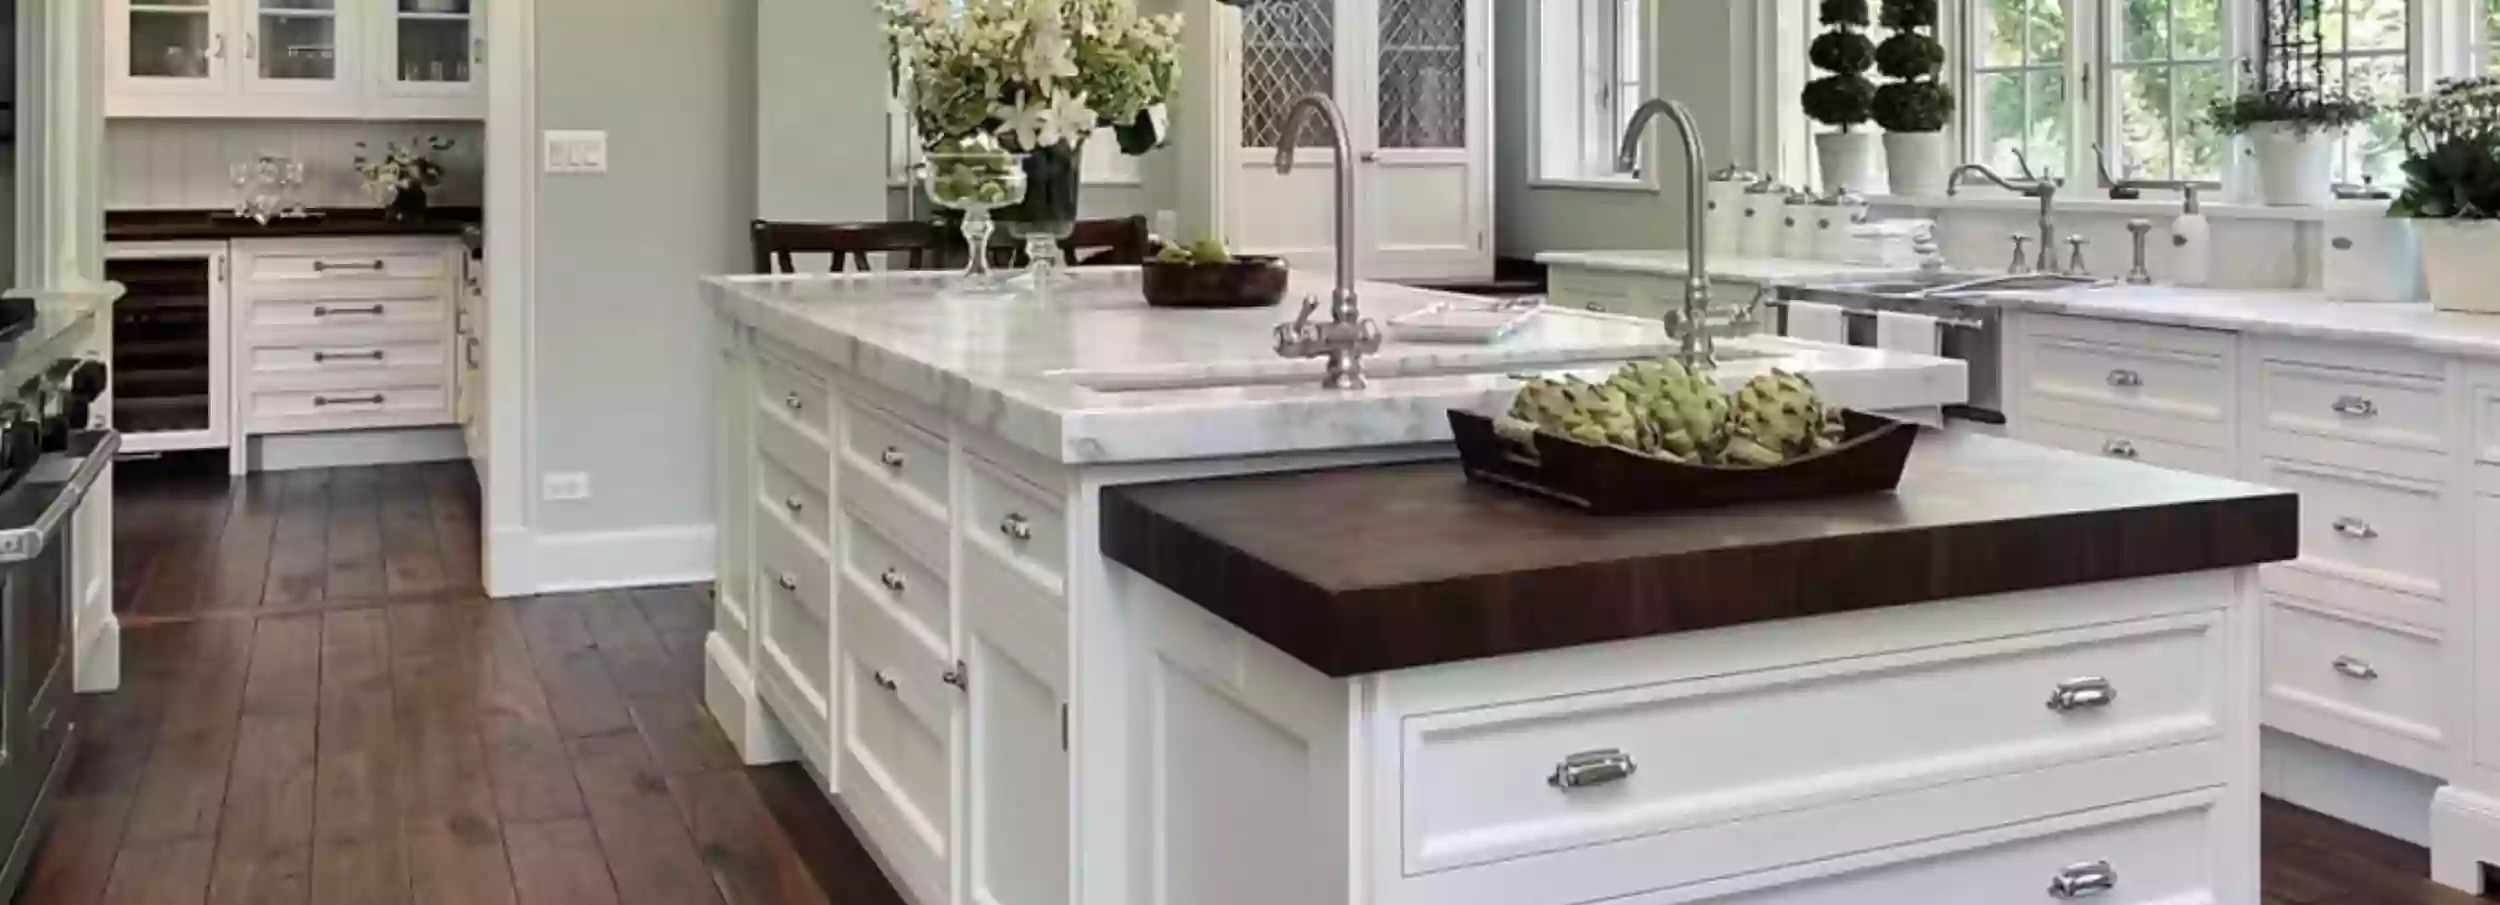 Kitchen island in large, bright modern kitchen with white cabinets and brown floor.